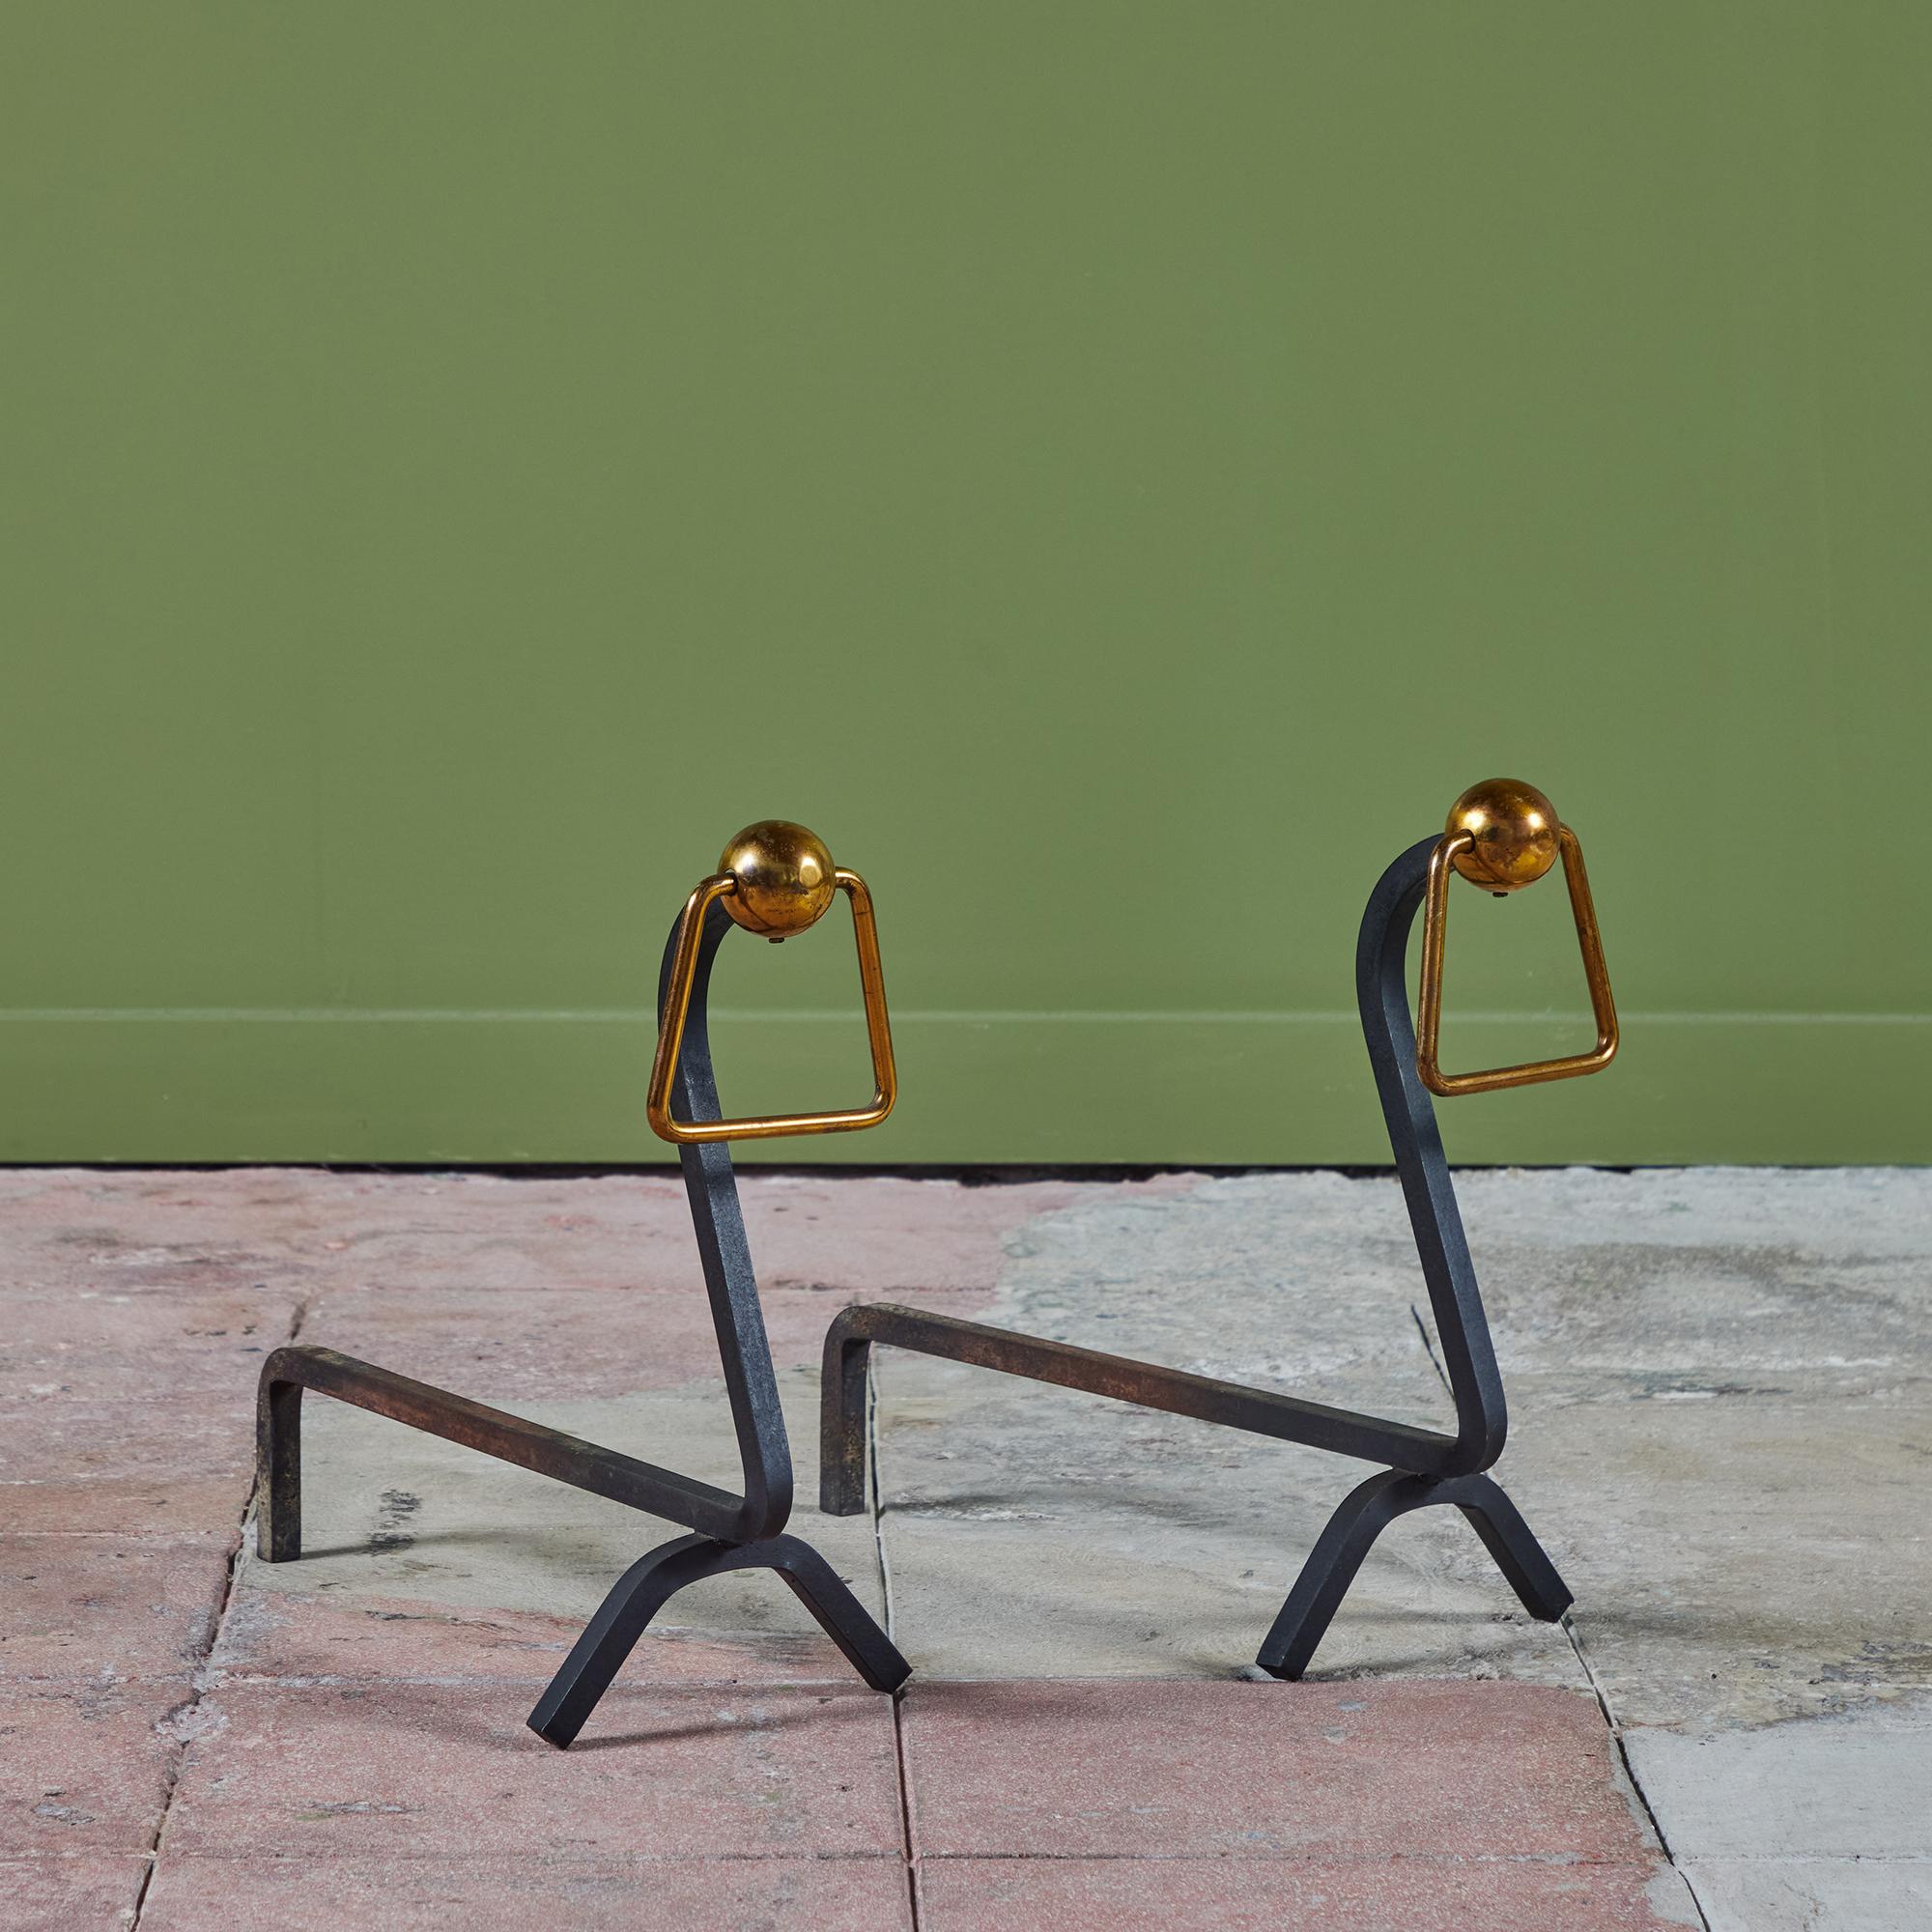 These modernist andirons feature a curved front facing wrought iron bar topped with a brass sphere and square ring. A perfect compliment to your home fireplace.

Dimensions
6” width x 16.5” depth x 12” height.

Condition
Good vintage condition with